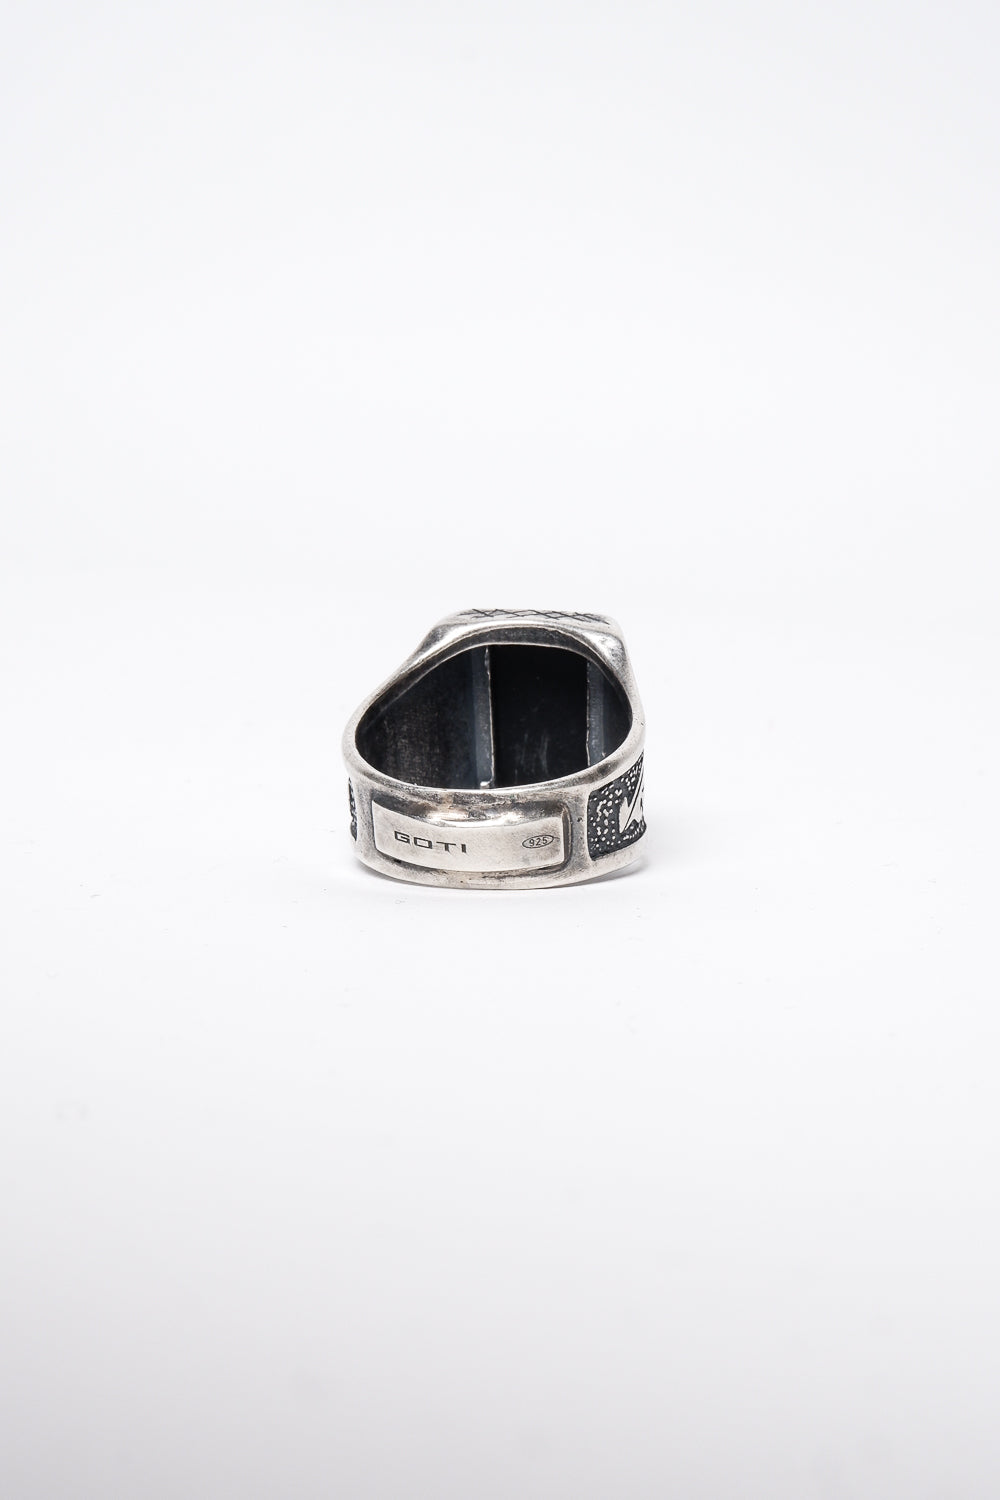 Buy the GOTI AN1015 Ring at Intro. Spend £50 for free UK delivery. Official stockists. We ship worldwide.